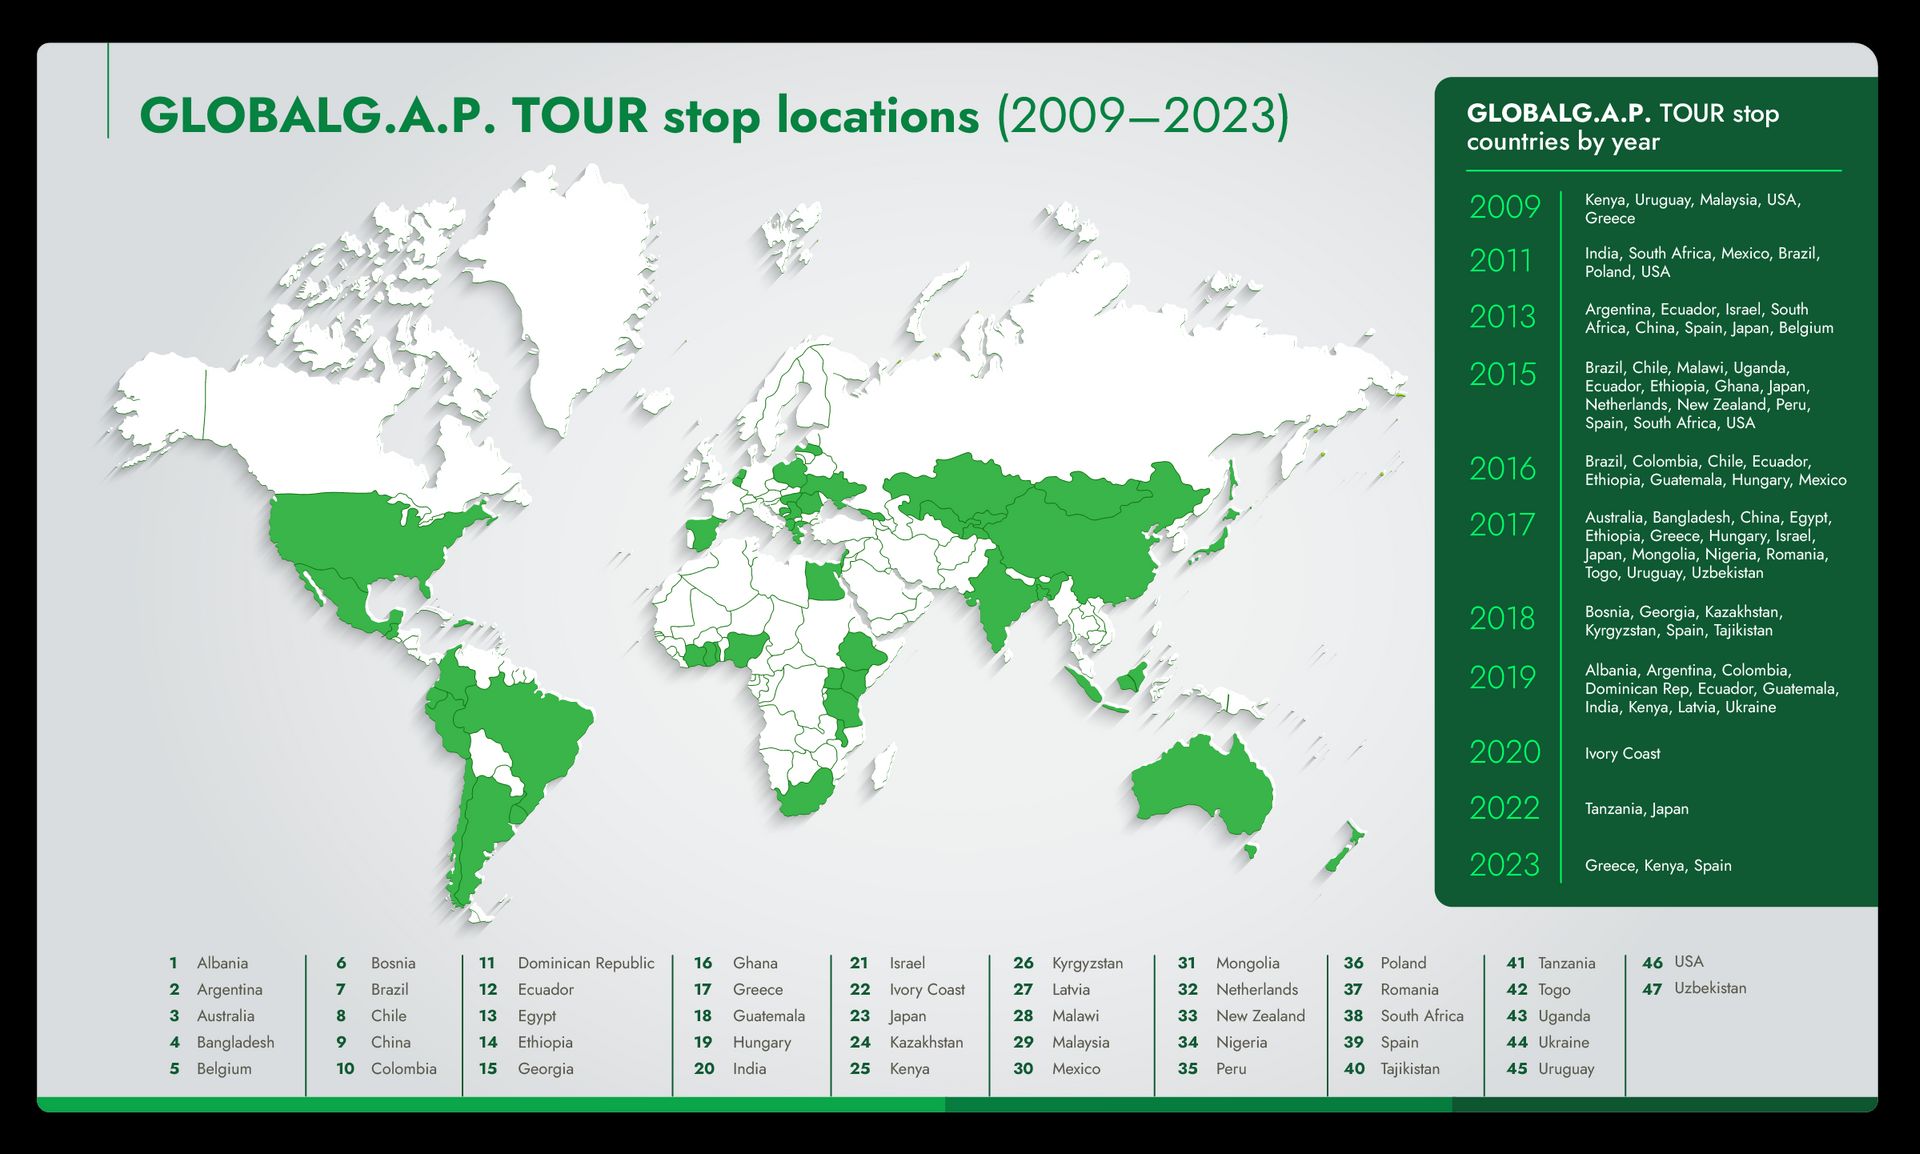 World map showing GLOBALG.A.P. TOUR stop locations between 2009 and 2023